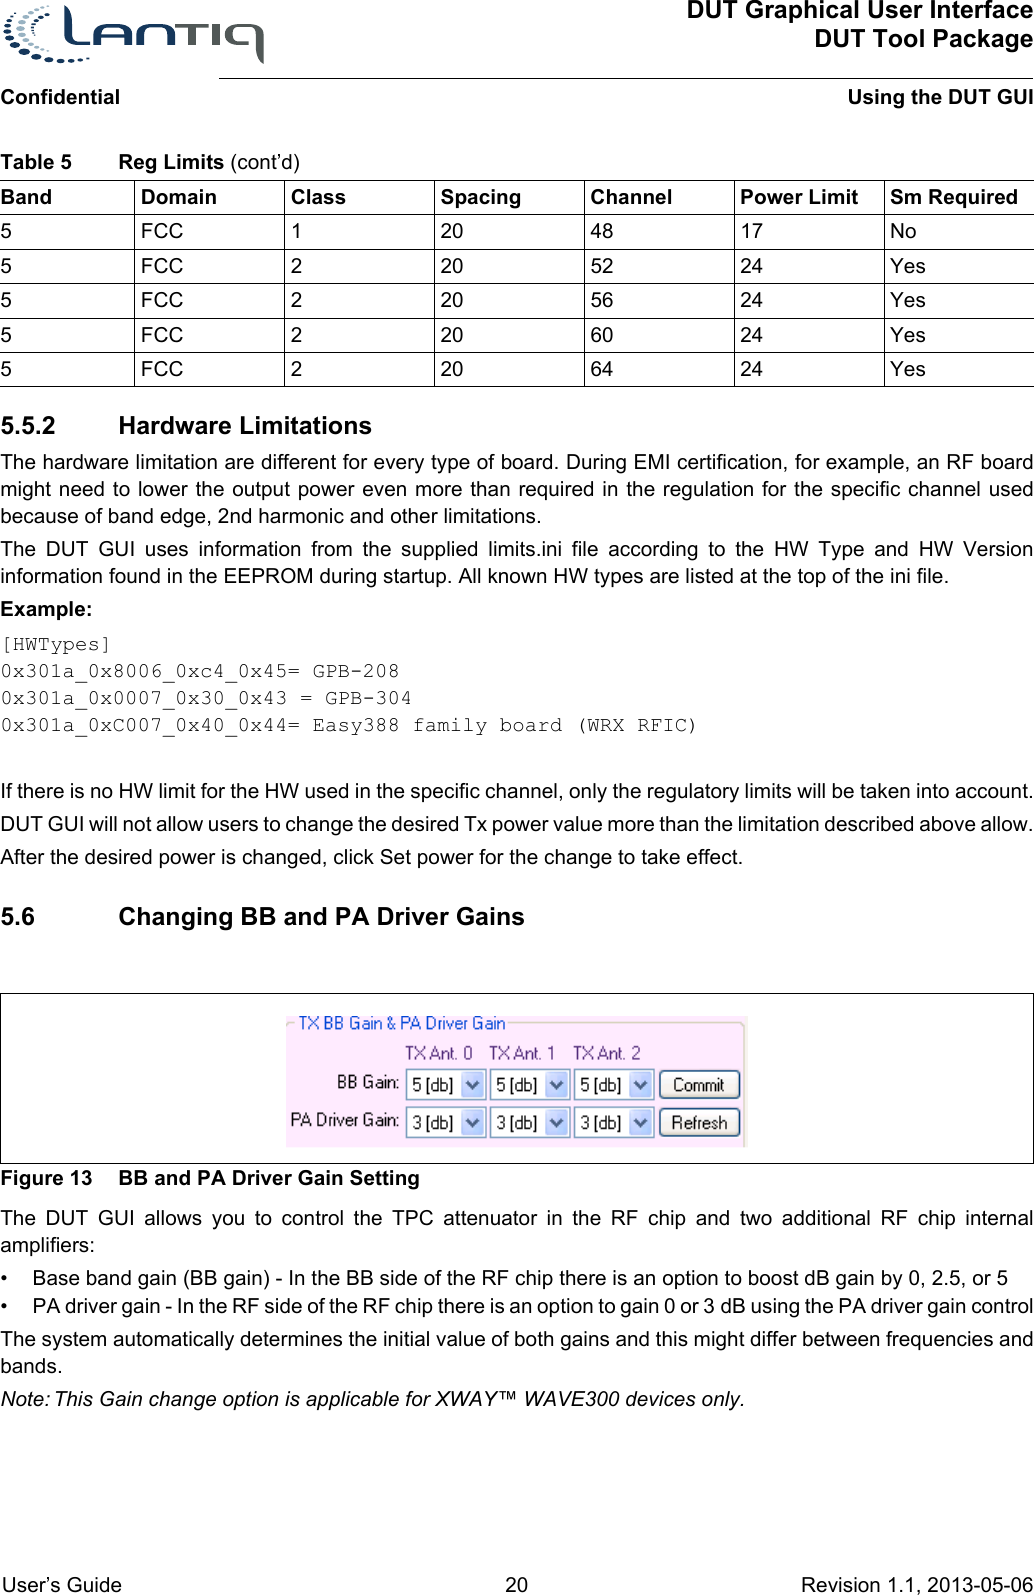 ConfidentialDUT Graphical User InterfaceDUT Tool PackageUsing the DUT GUI User’s Guide 20 Revision 1.1, 2013-05-06      5.5.2 Hardware LimitationsThe hardware limitation are different for every type of board. During EMI certification, for example, an RF board might need to lower the output power even more than required in the regulation for the specific channel used because of band edge, 2nd harmonic and other limitations.The DUT GUI uses information from the supplied limits.ini file according to the HW Type and HW Version information found in the EEPROM during startup. All known HW types are listed at the top of the ini file.Example:[HWTypes]0x301a_0x8006_0xc4_0x45= GPB-2080x301a_0x0007_0x30_0x43 = GPB-3040x301a_0xC007_0x40_0x44= Easy388 family board (WRX RFIC)If there is no HW limit for the HW used in the specific channel, only the regulatory limits will be taken into account.DUT GUI will not allow users to change the desired Tx power value more than the limitation described above allow.After the desired power is changed, click Set power for the change to take effect.5.6 Changing BB and PA Driver GainsFigure 13 BB and PA Driver Gain SettingThe DUT GUI allows you to control the TPC attenuator in the RF chip and two additional RF chip internal amplifiers:• Base band gain (BB gain) - In the BB side of the RF chip there is an option to boost dB gain by 0, 2.5, or 5• PA driver gain - In the RF side of the RF chip there is an option to gain 0 or 3 dB using the PA driver gain controlThe system automatically determines the initial value of both gains and this might differ between frequencies and bands.Note: This Gain change option is applicable for XWAY™ WAVE300 devices only.5FCC 120 48 17 No5FCC 220 52 24 Yes5FCC 220 56 24 Yes5FCC 220 60 24 Yes5FCC 220 64 24 YesTable 5 Reg Limits (cont’d)Band Domain Class Spacing Channel Power Limit Sm Required